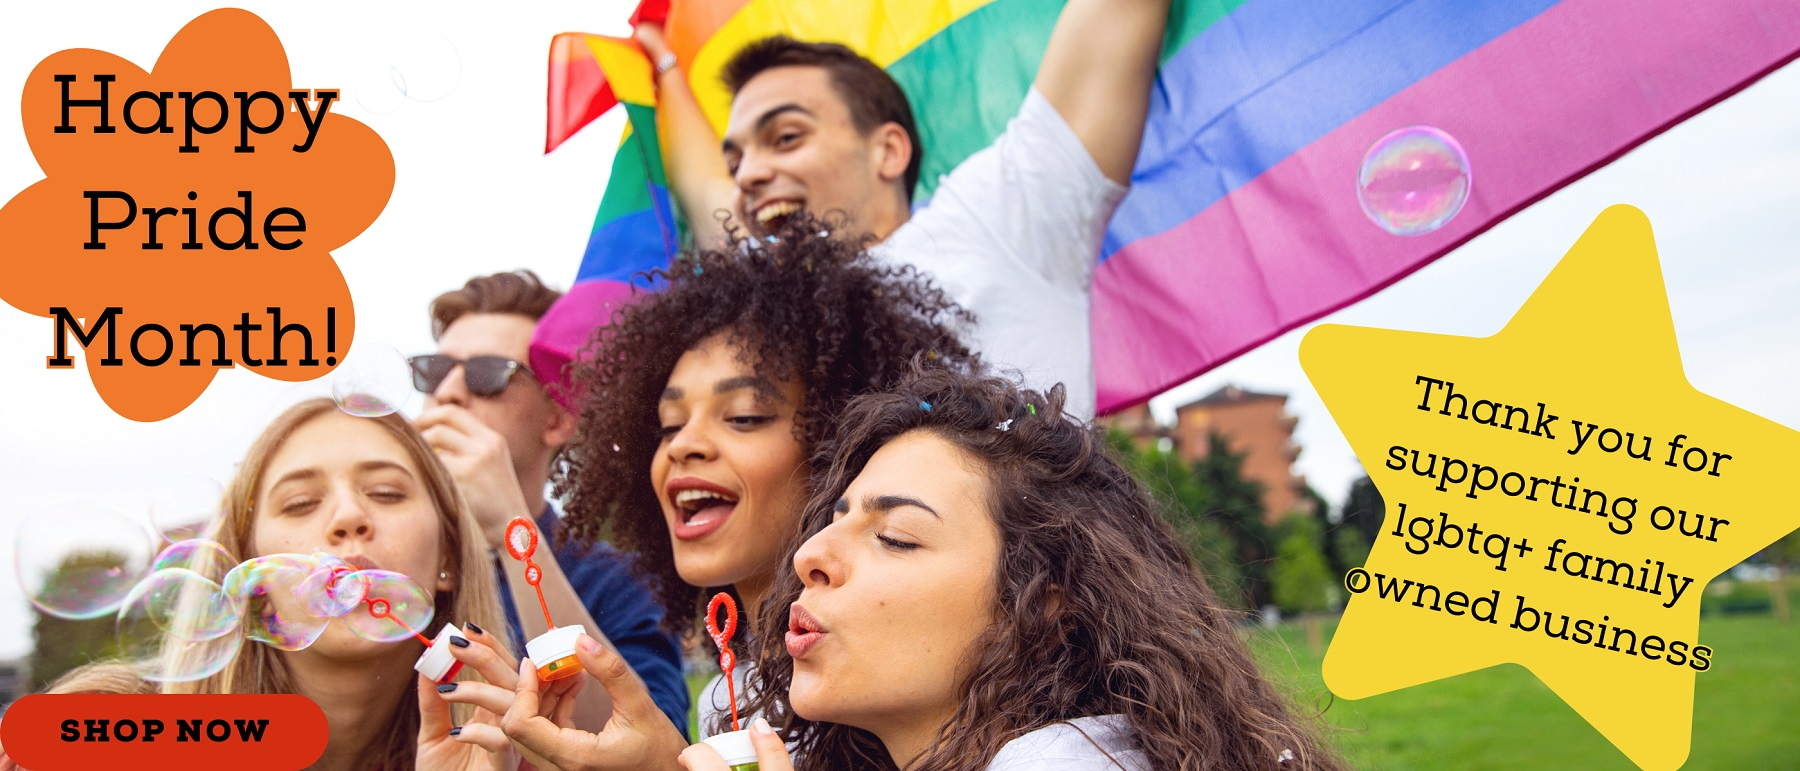 Young masc person holds a pride flag above [his] head behind several other young adults who are blowing bubbles. All smiling. Image text: Happy Pride Month! thank you for supporting our lgbtq+ family owned business.